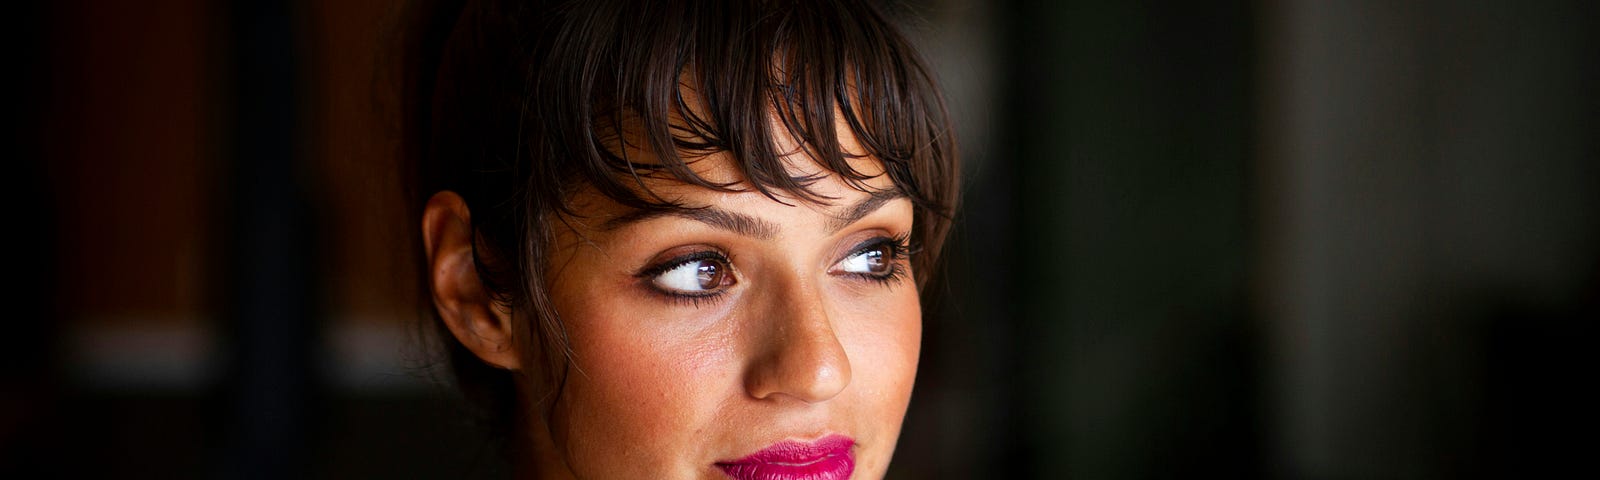 A Brunette woman wearing makeup looking over to the side